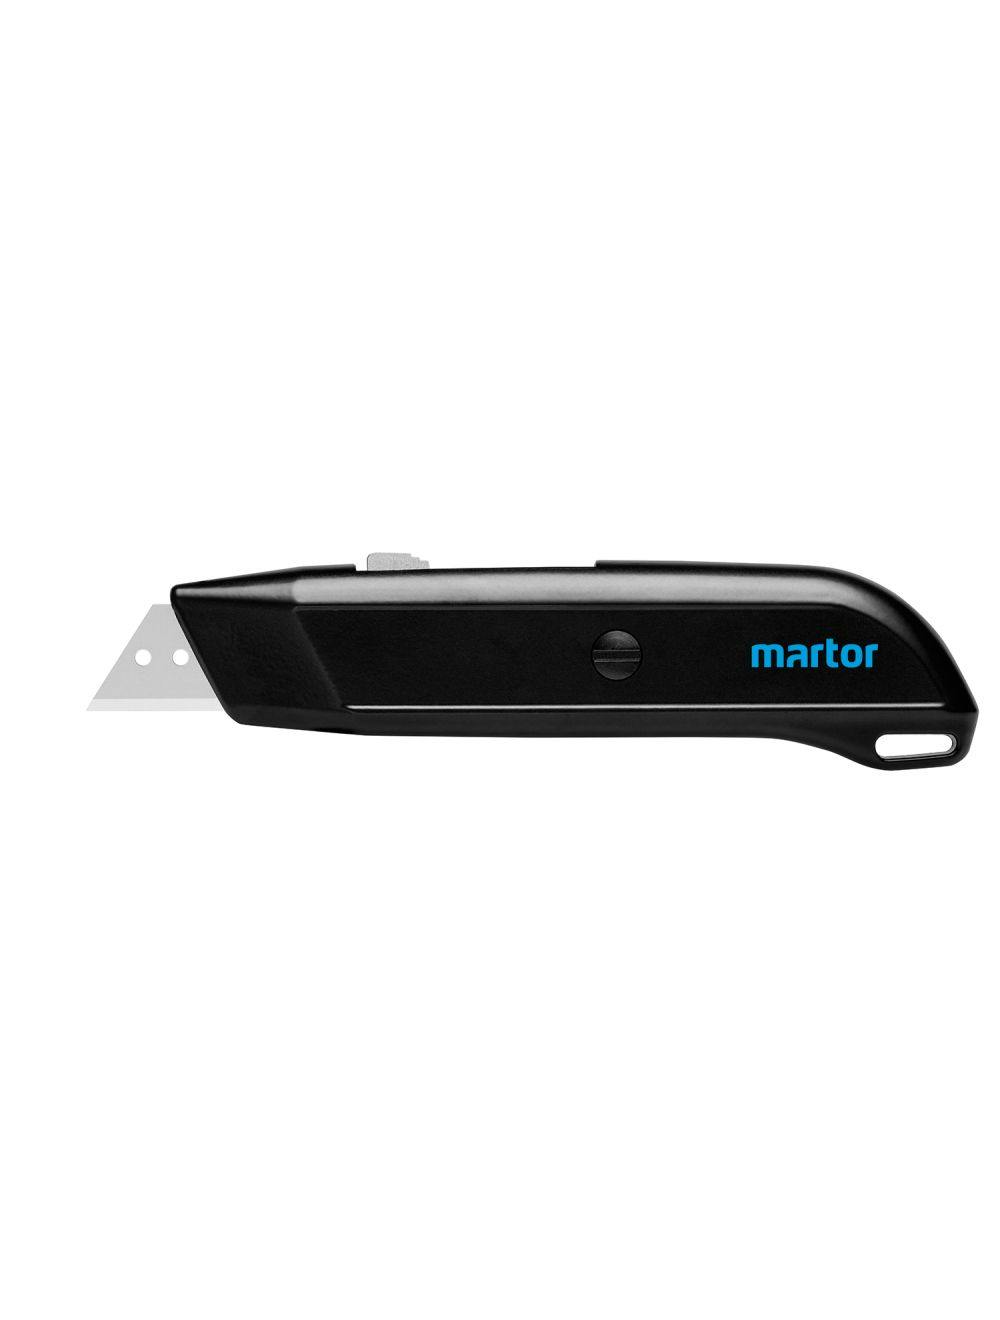 Martor Secunorm Multisafe With Blade No. 5232, Right And Left Handers (Single Unit)